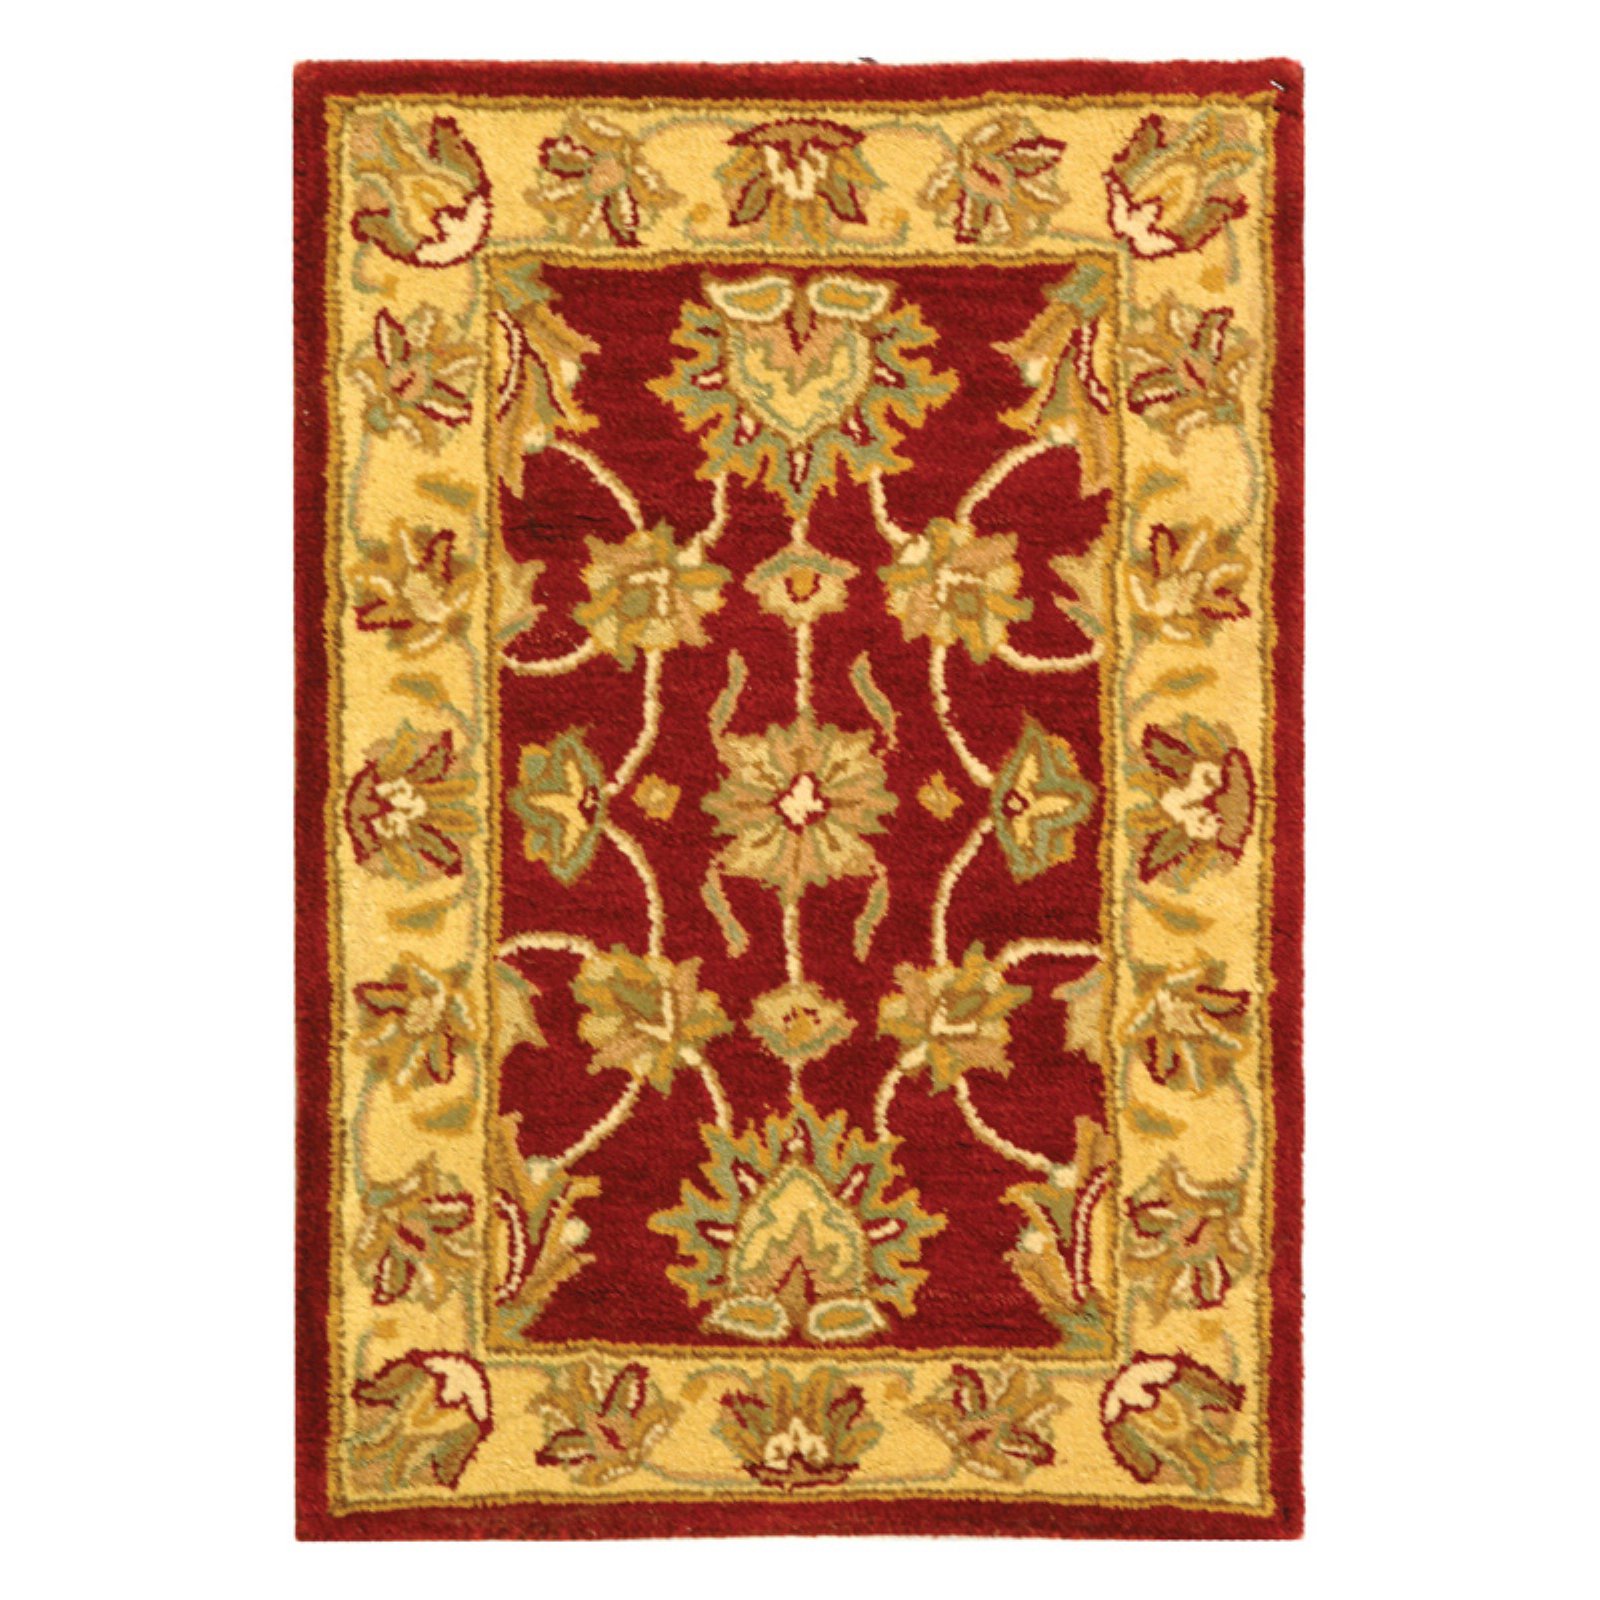 SAFAVIEH Heritage Regis Traditional Wool Area Rug, Red/Gold, 3' x 5' - image 2 of 5